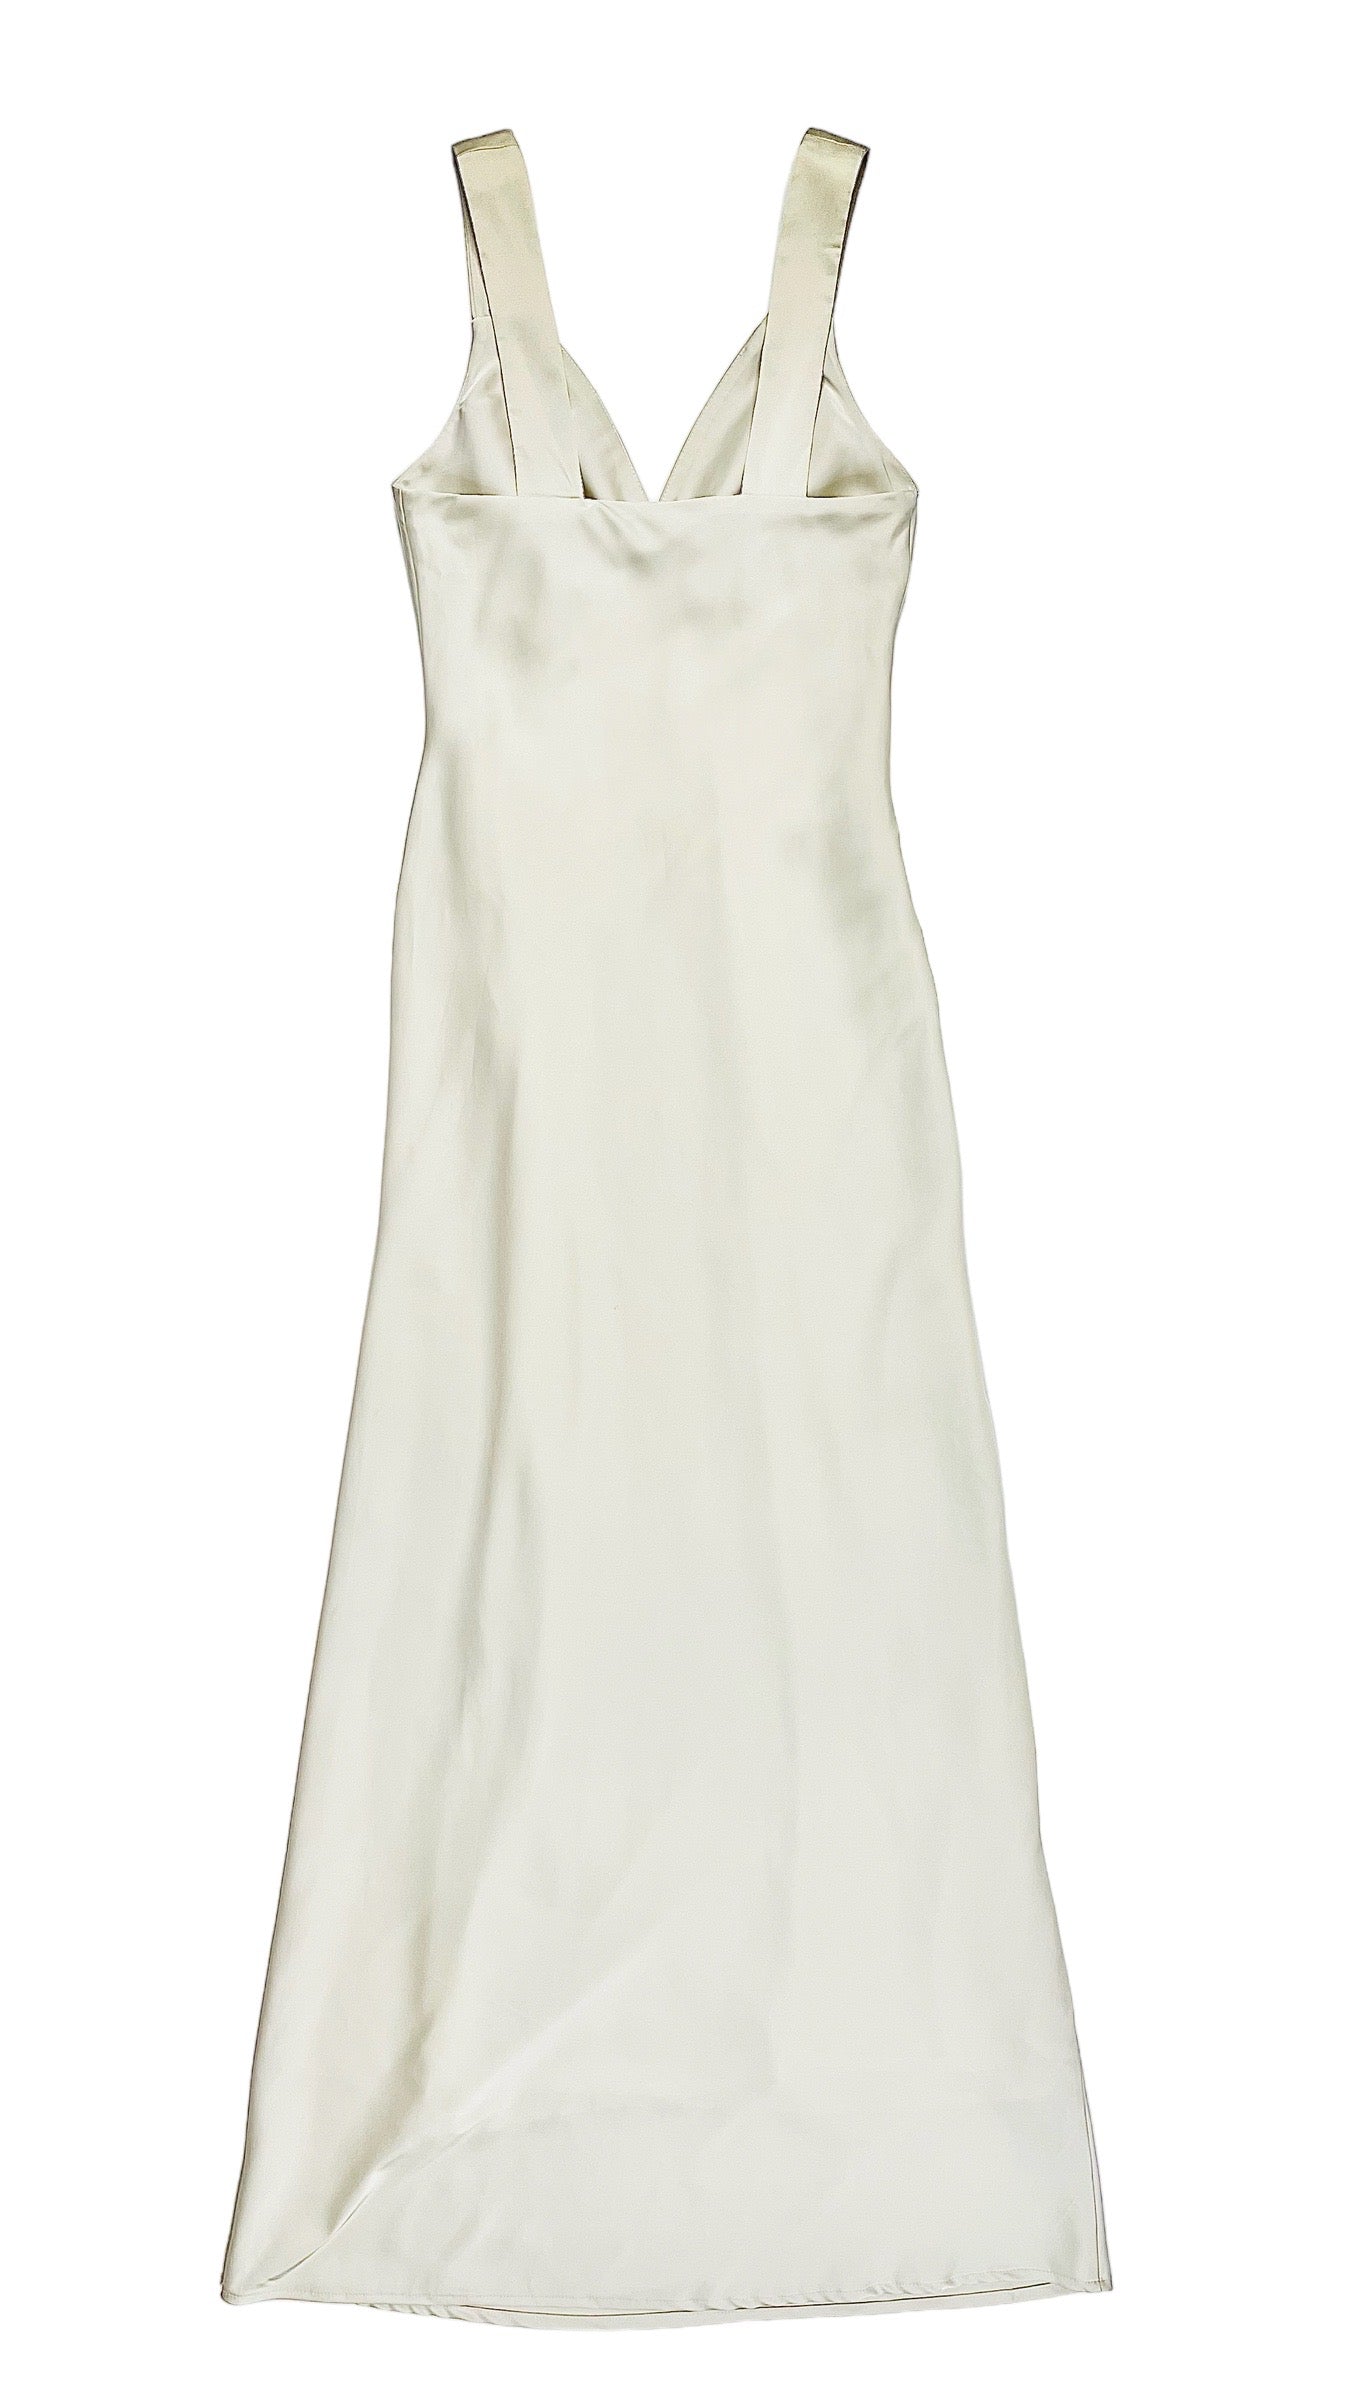 Pre-Loved HOUSE OF HARLOW 1960 off white satin maxi tank dress - Size XS